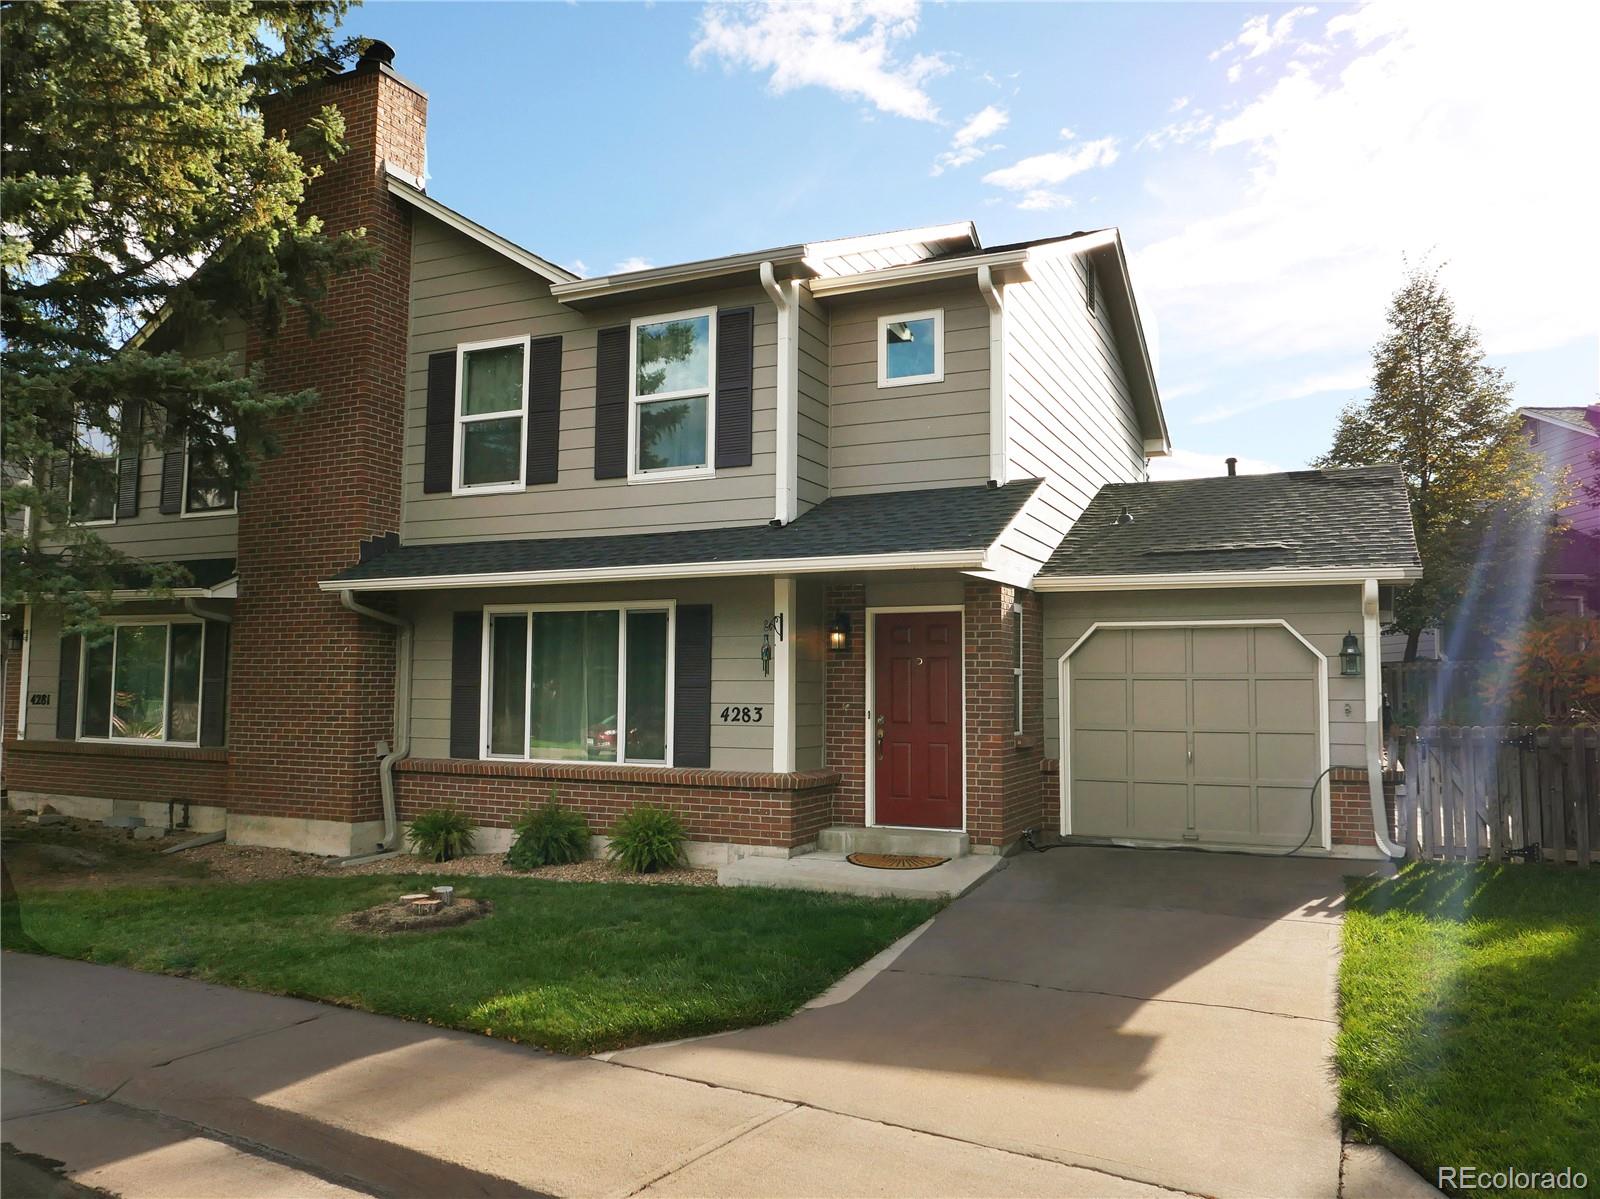 4283 w 111th circle, Westminster sold home. Closed on 2024-01-26 for $457,000.